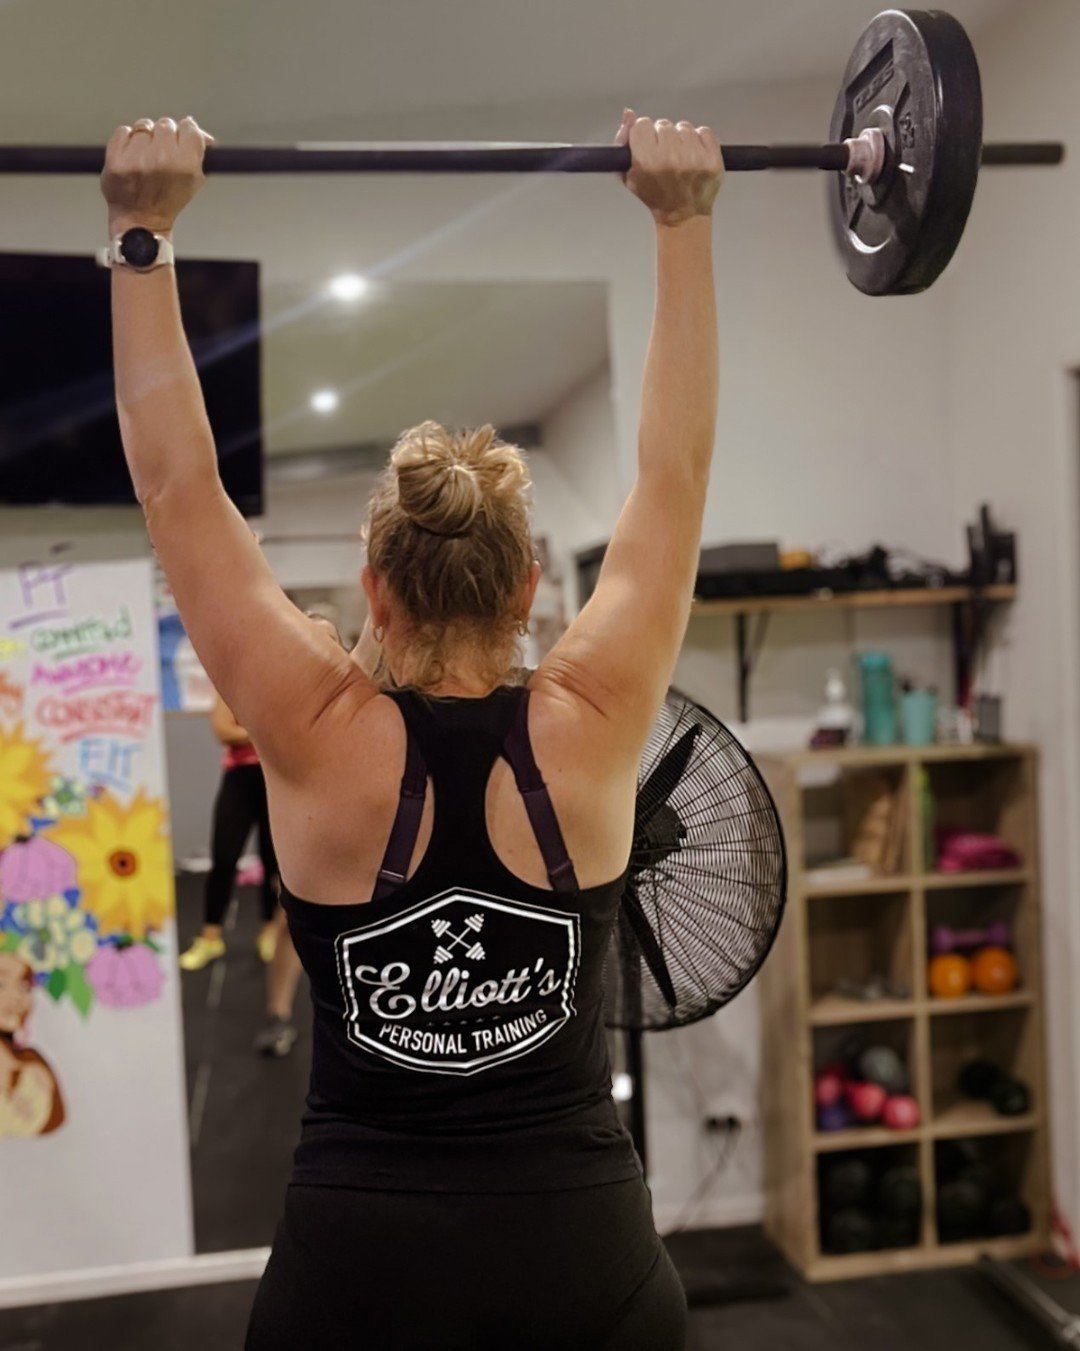 You won&rsquo;t get the body you want without strength training

Go lift heavy weights!
.
.
.
Weightlifting isn't just about achieving your desired physique. It's about feeling amazing too!

When you lift weights, you're not just sculpting your body;